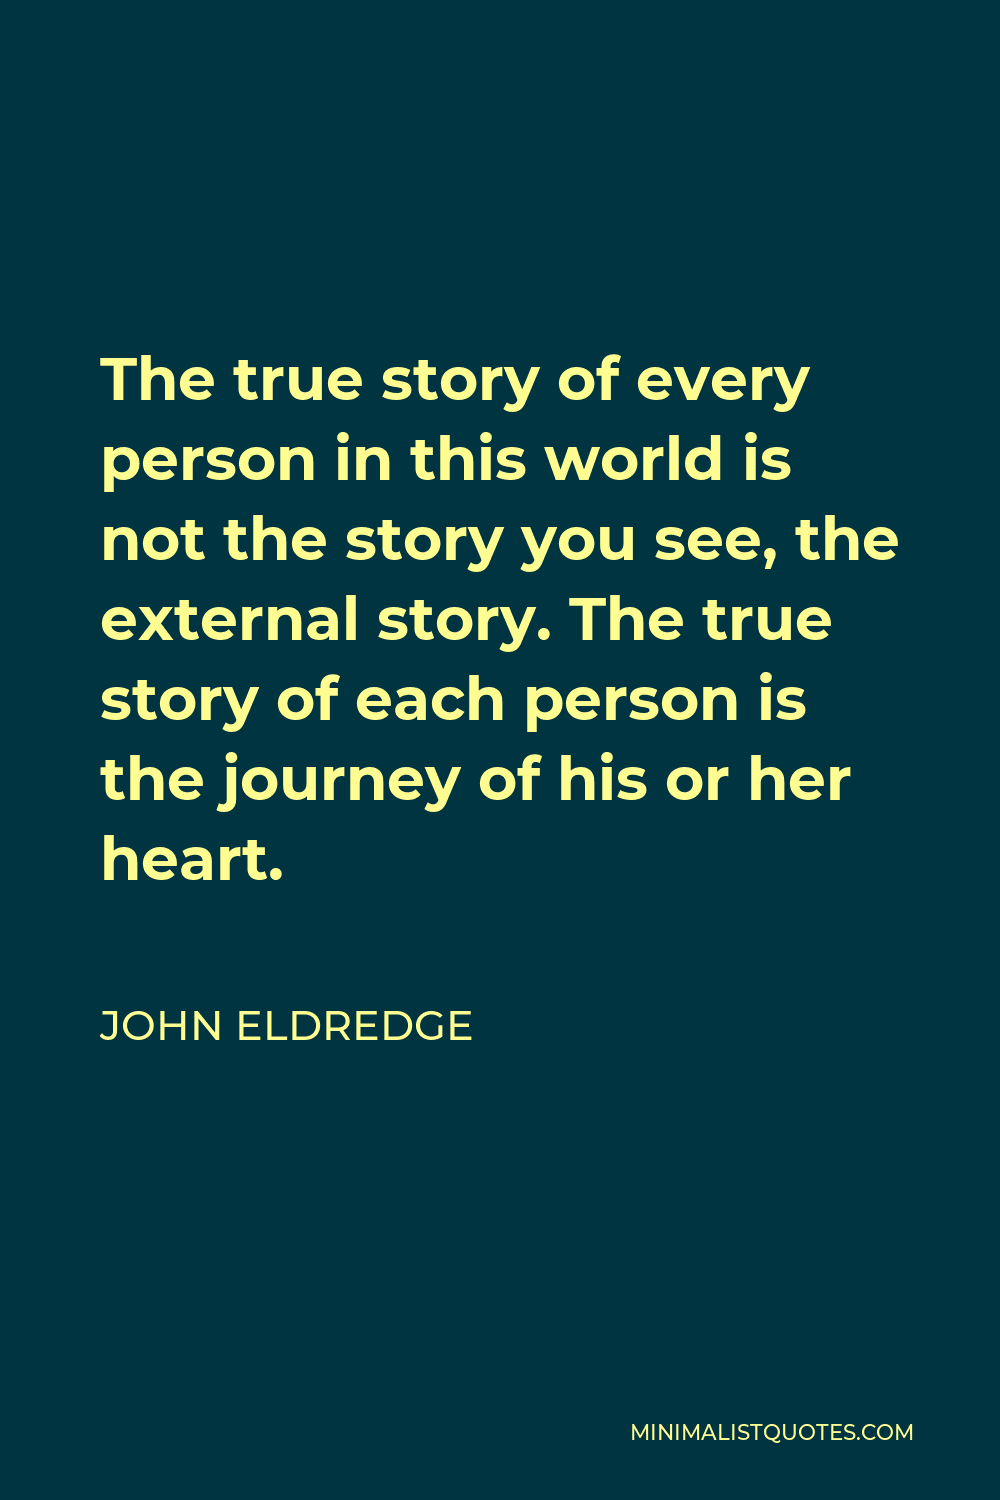 John Eldredge Quote: The true story of every person in this world is not  the story you see, the external story. The true story of each person is the  journey of his